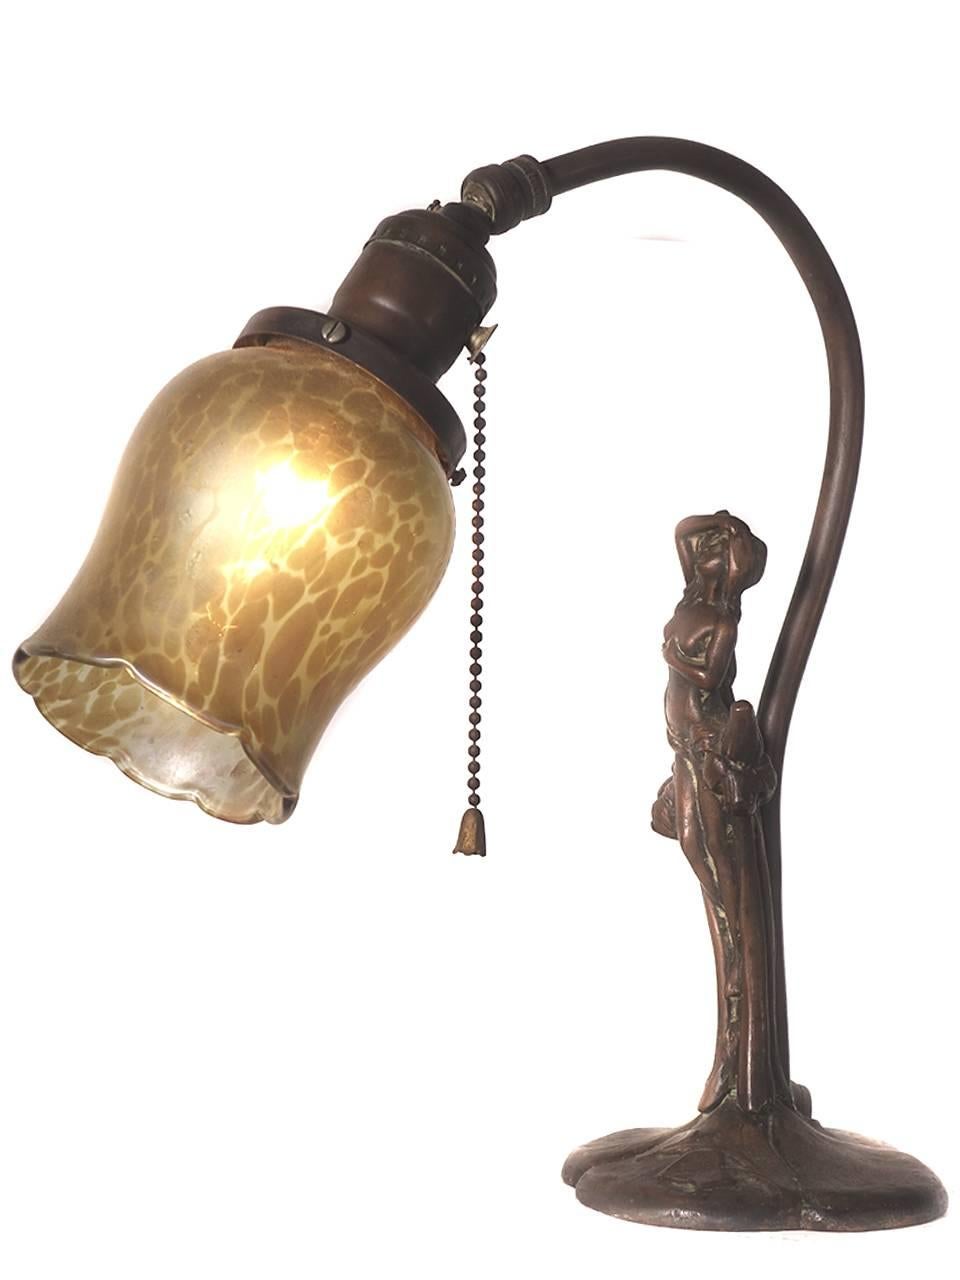 This Art Nouveau is a small gem. Its cast in bronze with a beautiful one of a kind handblown tortoiseshell patterned art glass shade.